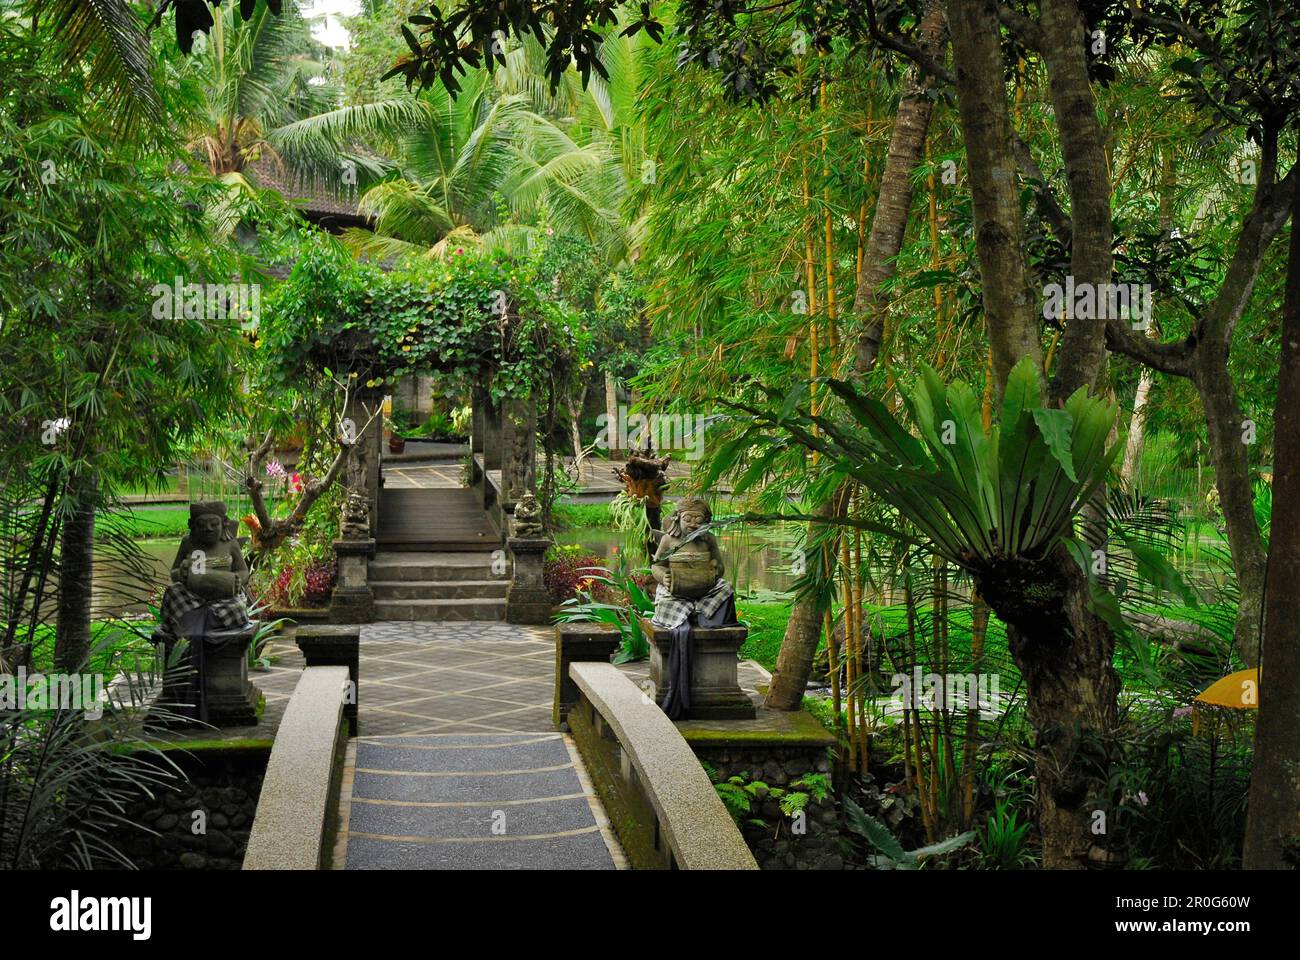 Palm trees and stone figures at the garden of the ARMA museum, Ubud, Bali, Indonesia, Asia Stock Photo